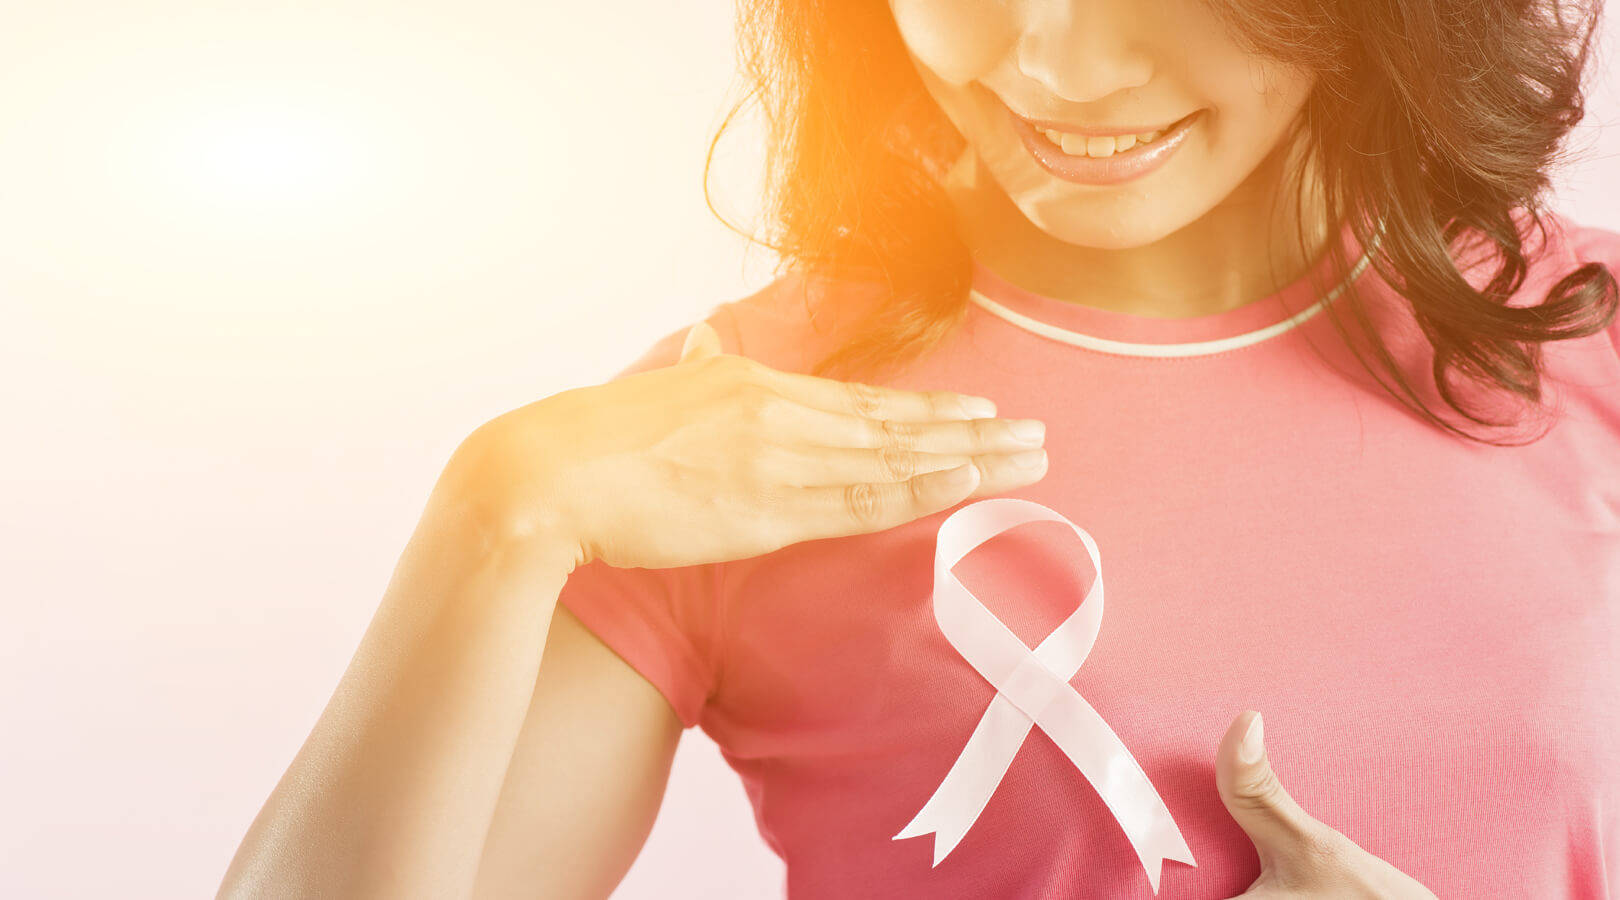 Strength and Awareness - Woman Embracing Breast Cancer Ribbon Wallpaper